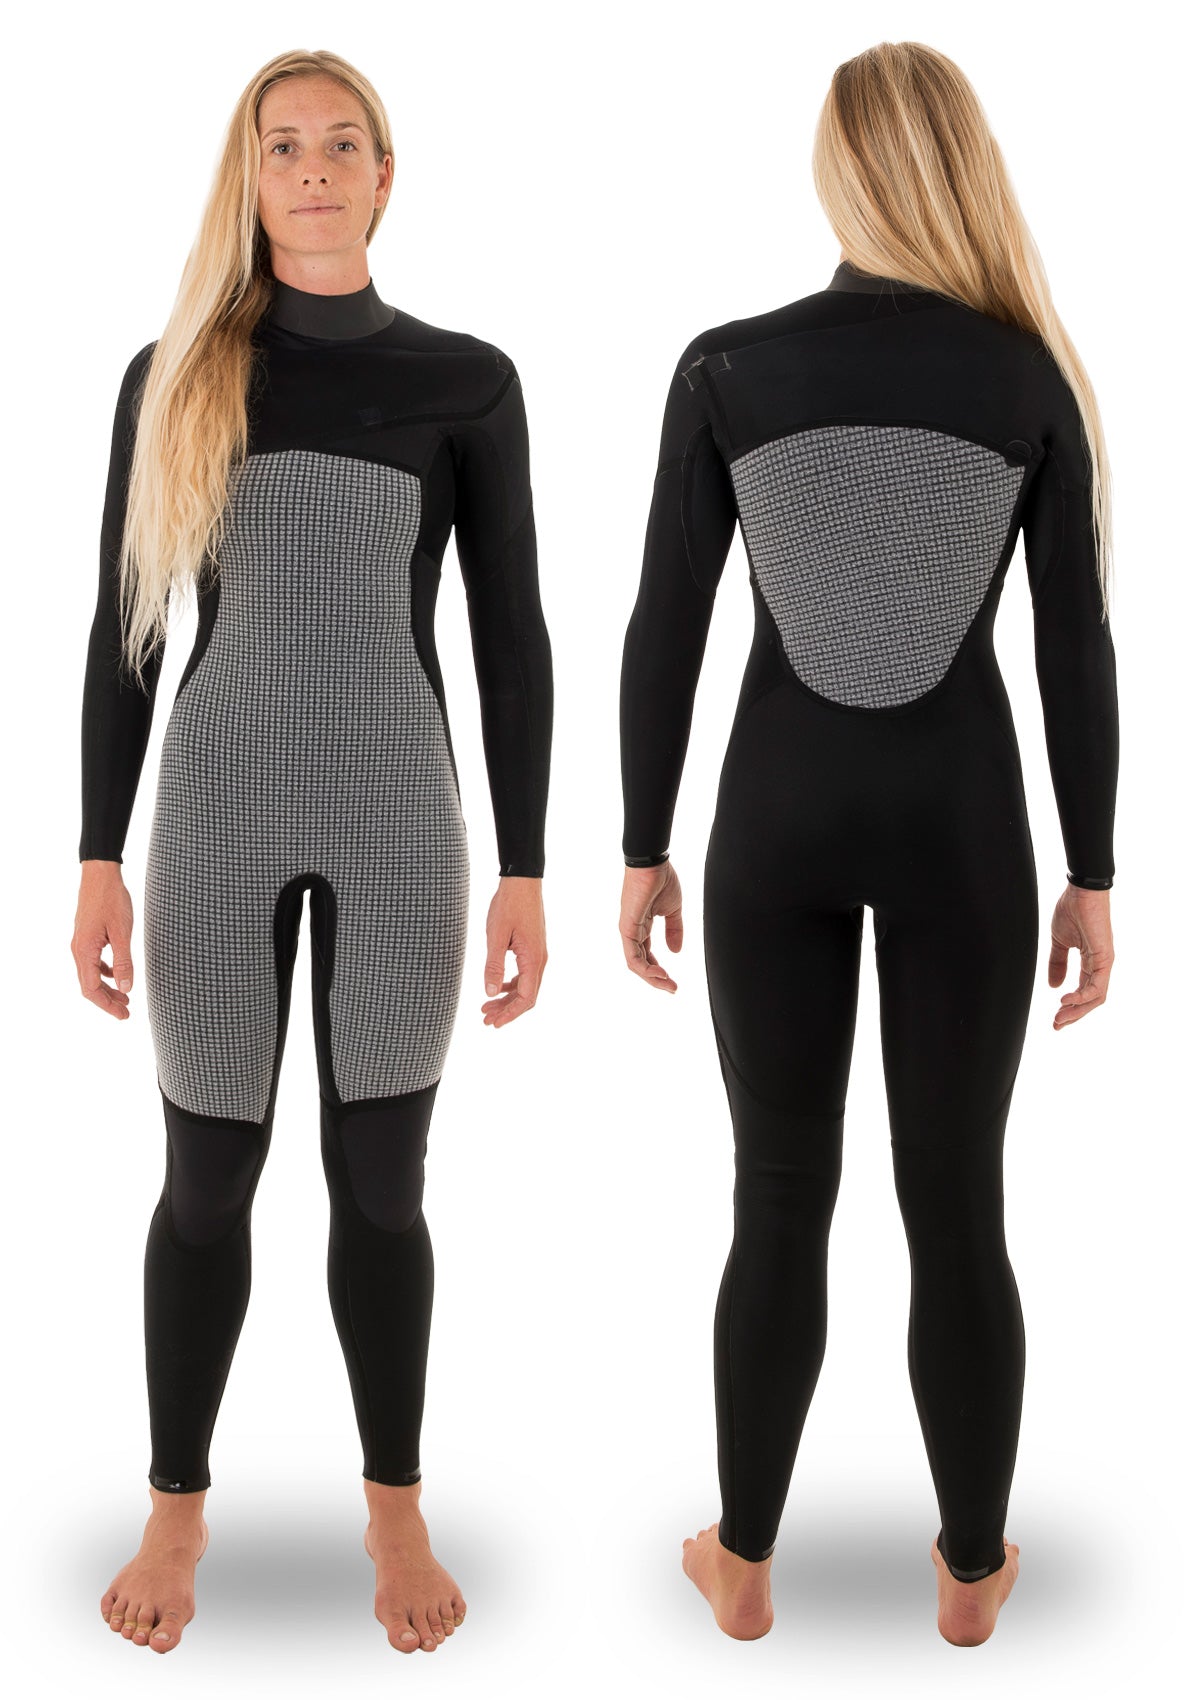 needessentials womens 5/4 chest zip thermal winter wetsuit surfing black non branded coldwater